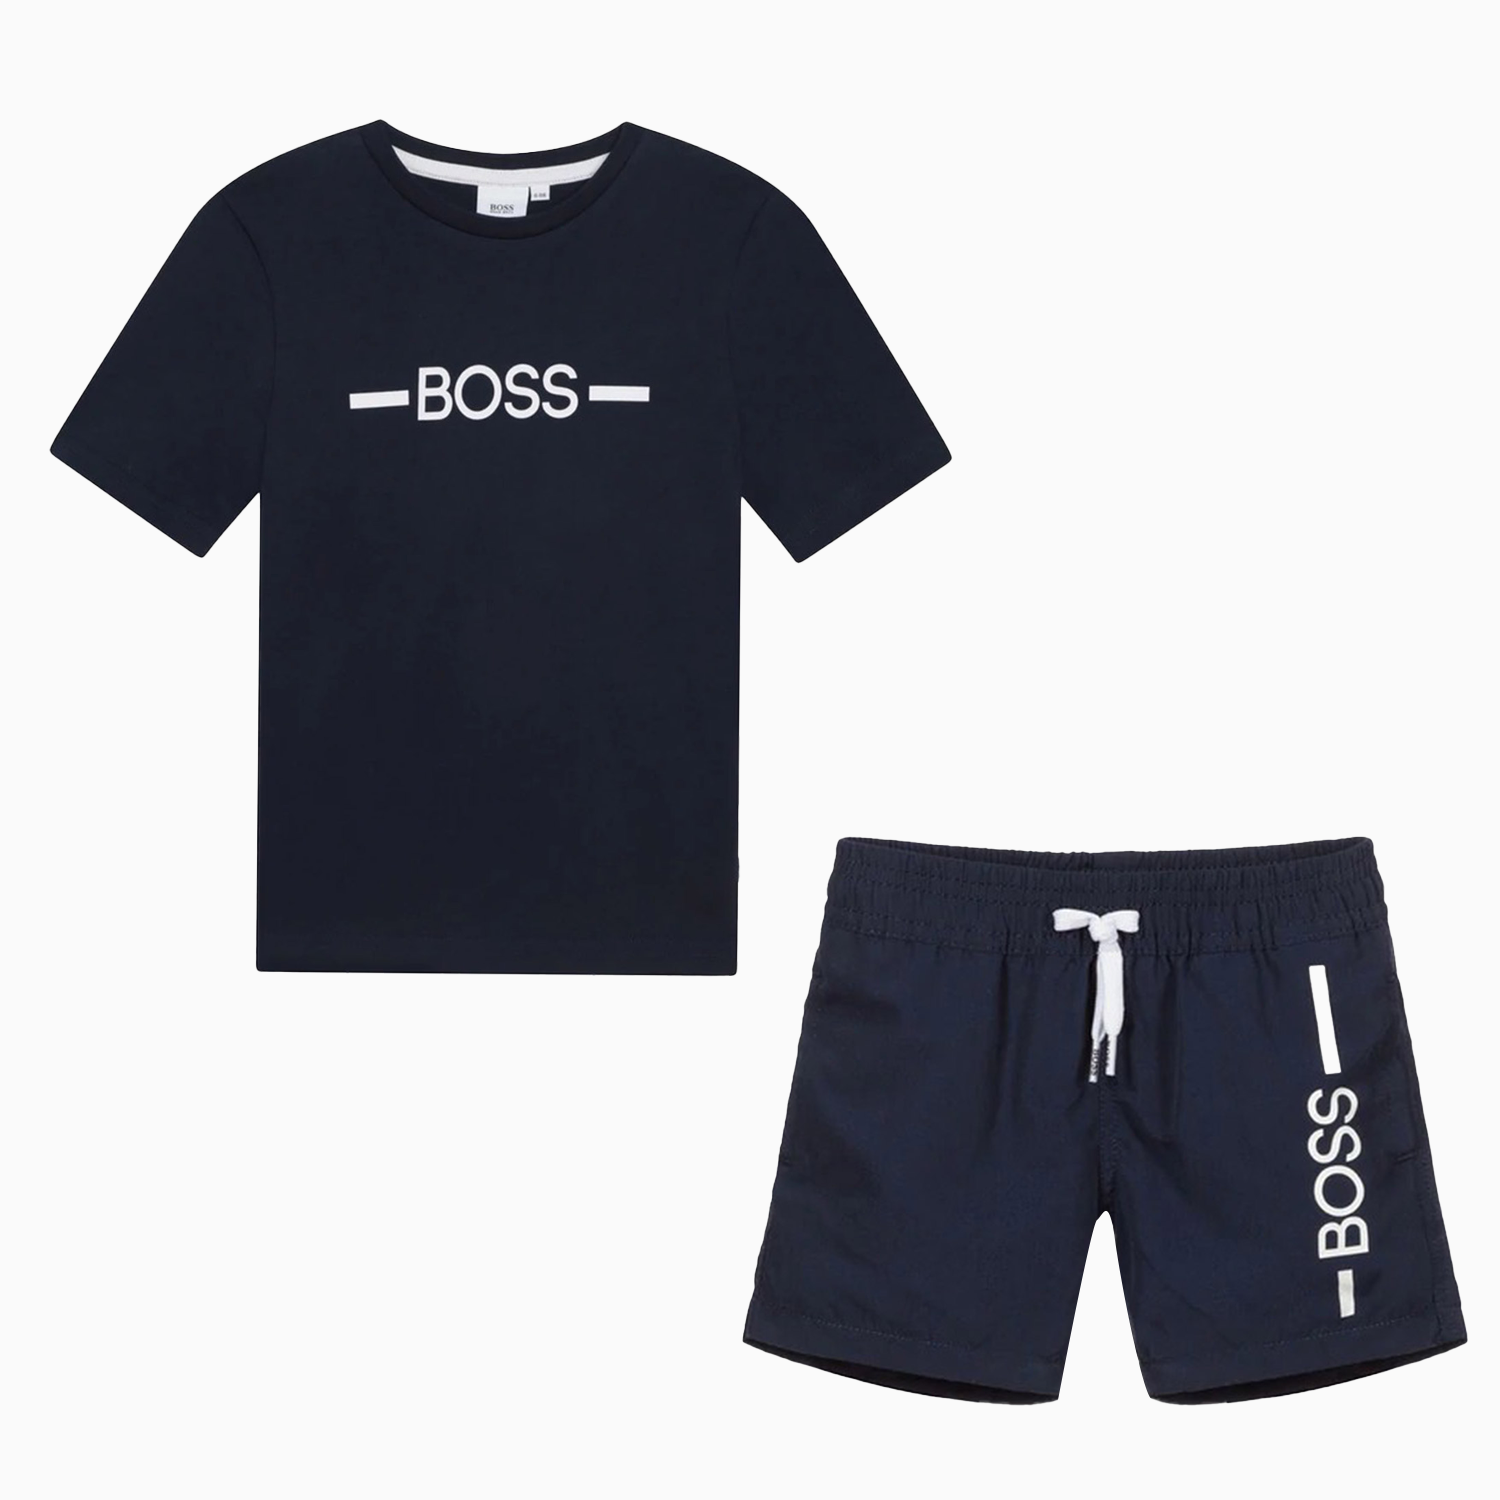 Hugo Boss Kid's Surfer Outfit - Color: Navy - Kids Premium Clothing -